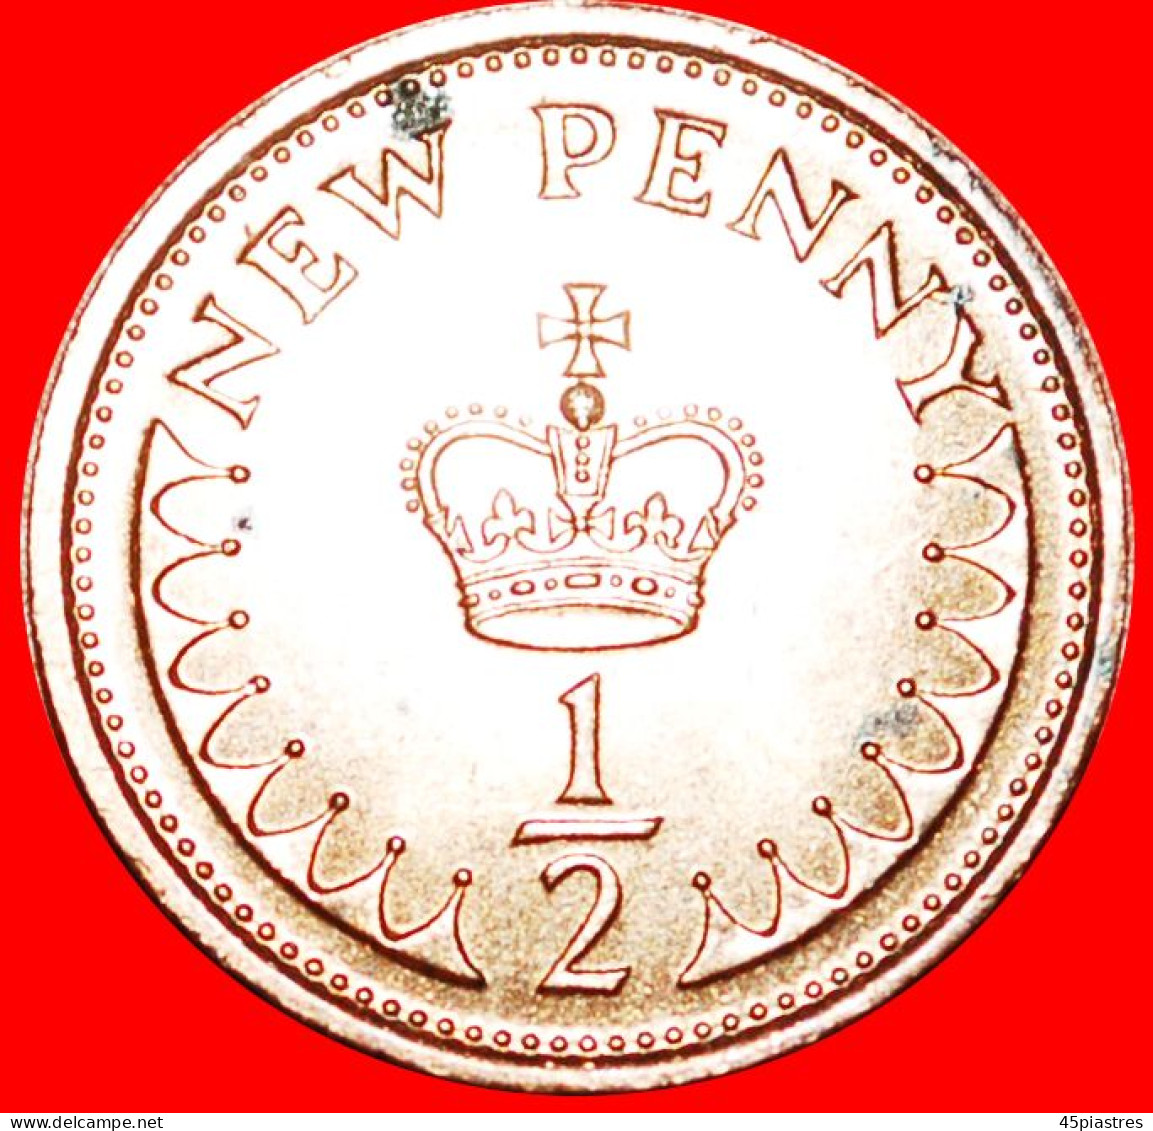 &#9733;CROWN: UNITED KINGDOM&#9733;1/2 PENNY 1974 MINT LUSTER! LOW START &#9733; NO RESERVE! House Of Tudor(1485 - 1603) - 1/2 Penny & 1/2 New Penny